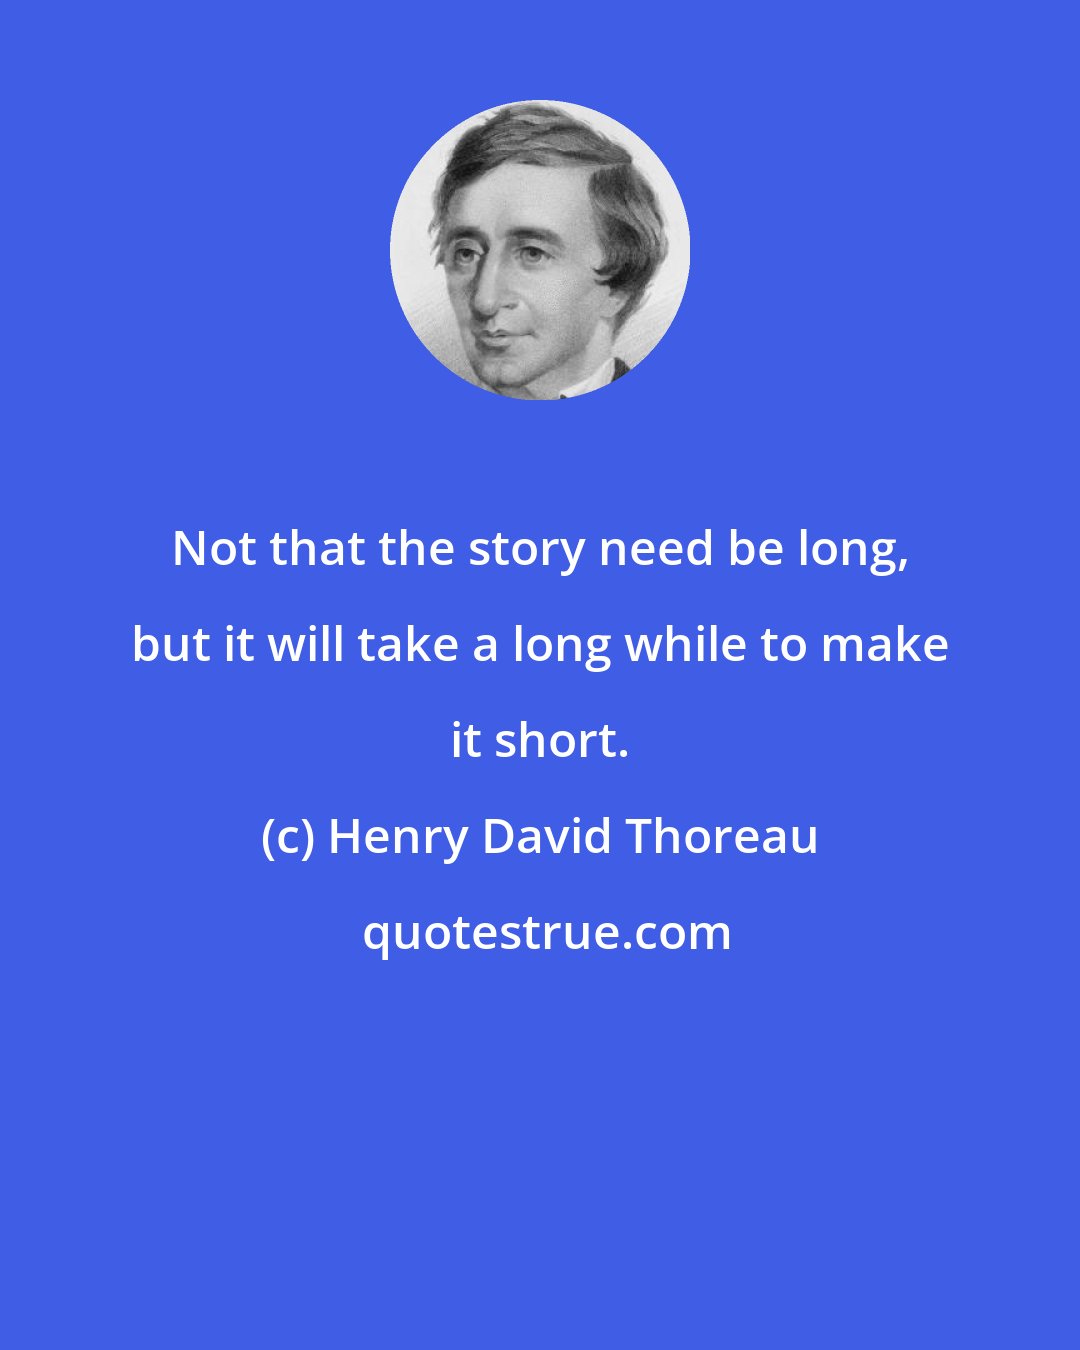 Henry David Thoreau: Not that the story need be long, but it will take a long while to make it short.